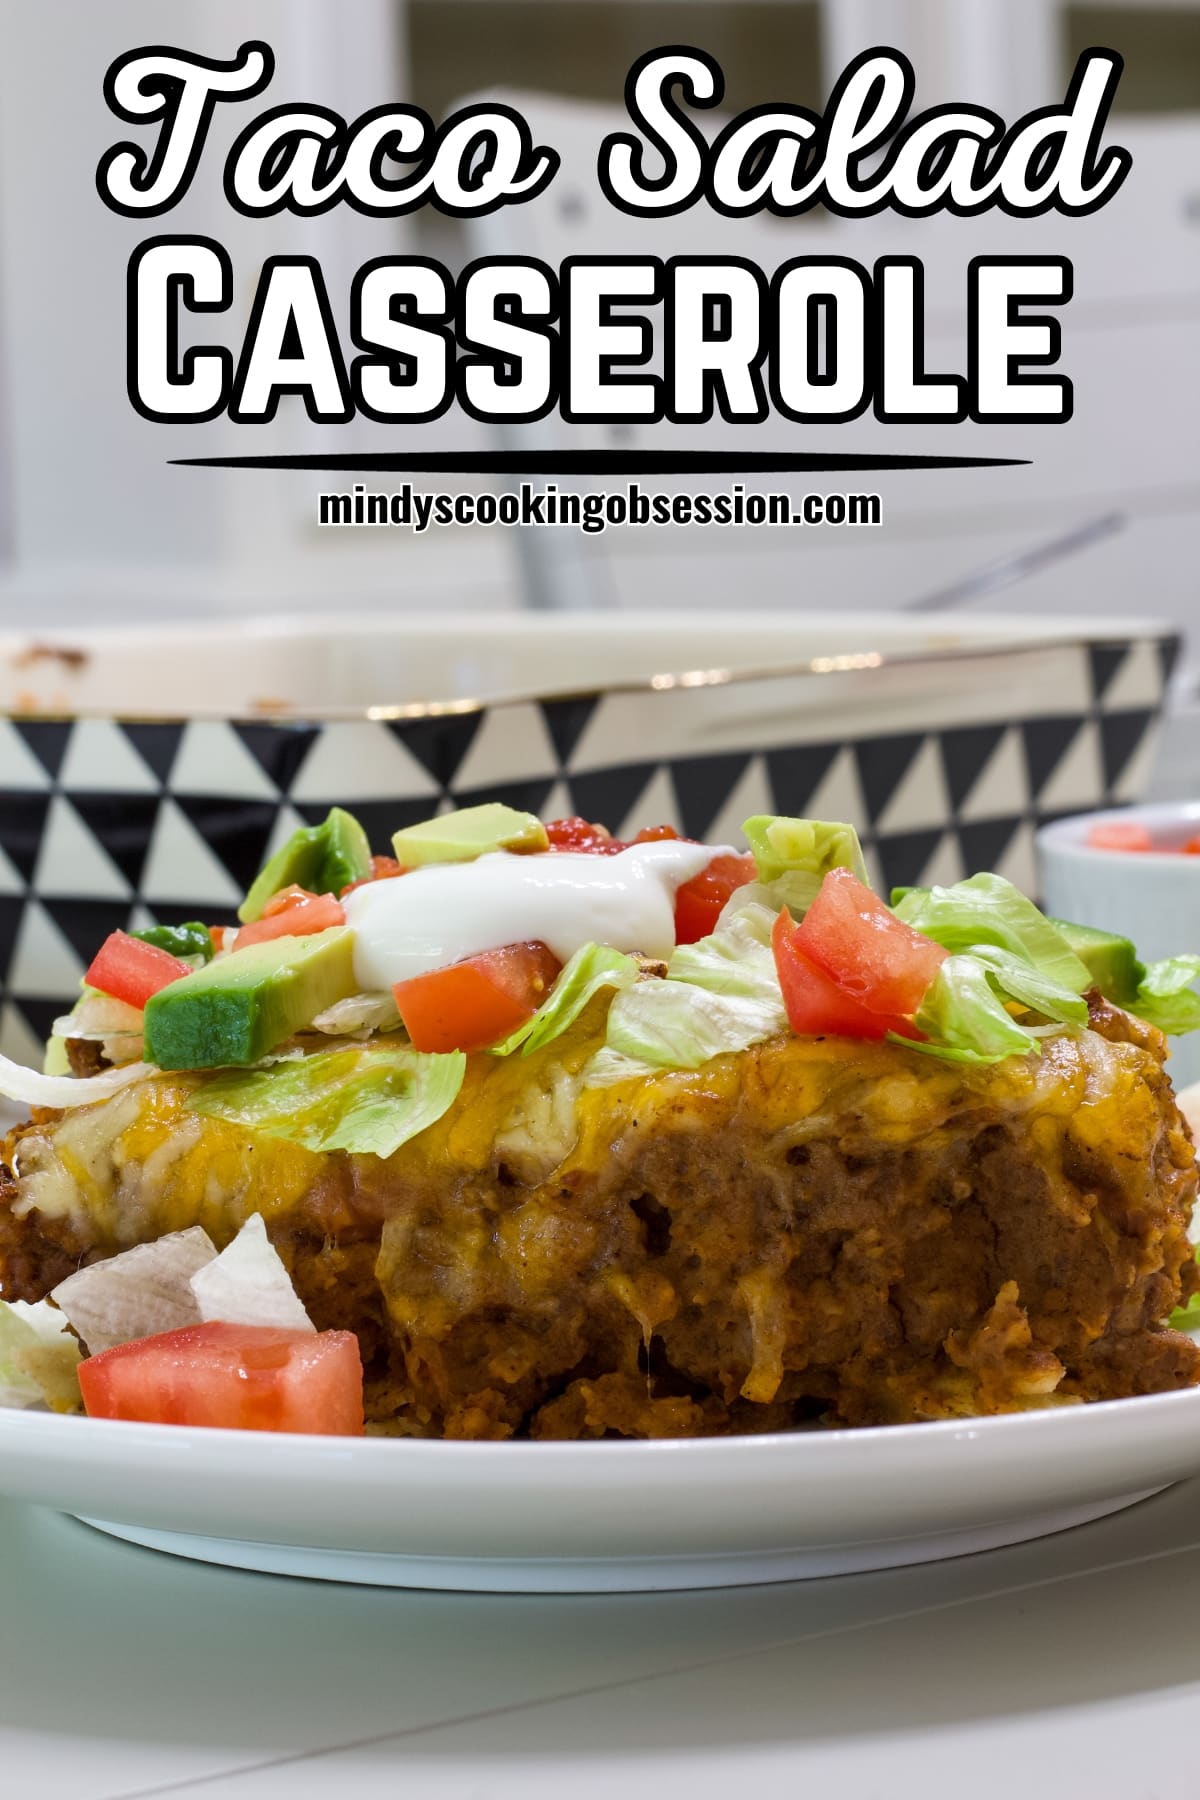 Easy Taco Salad Casserole Recipe with Beef & Beans - A delicious twist on a classic. Perfectly cheesy for a quick hearty and satisfying meal! via @mindyscookingobsession